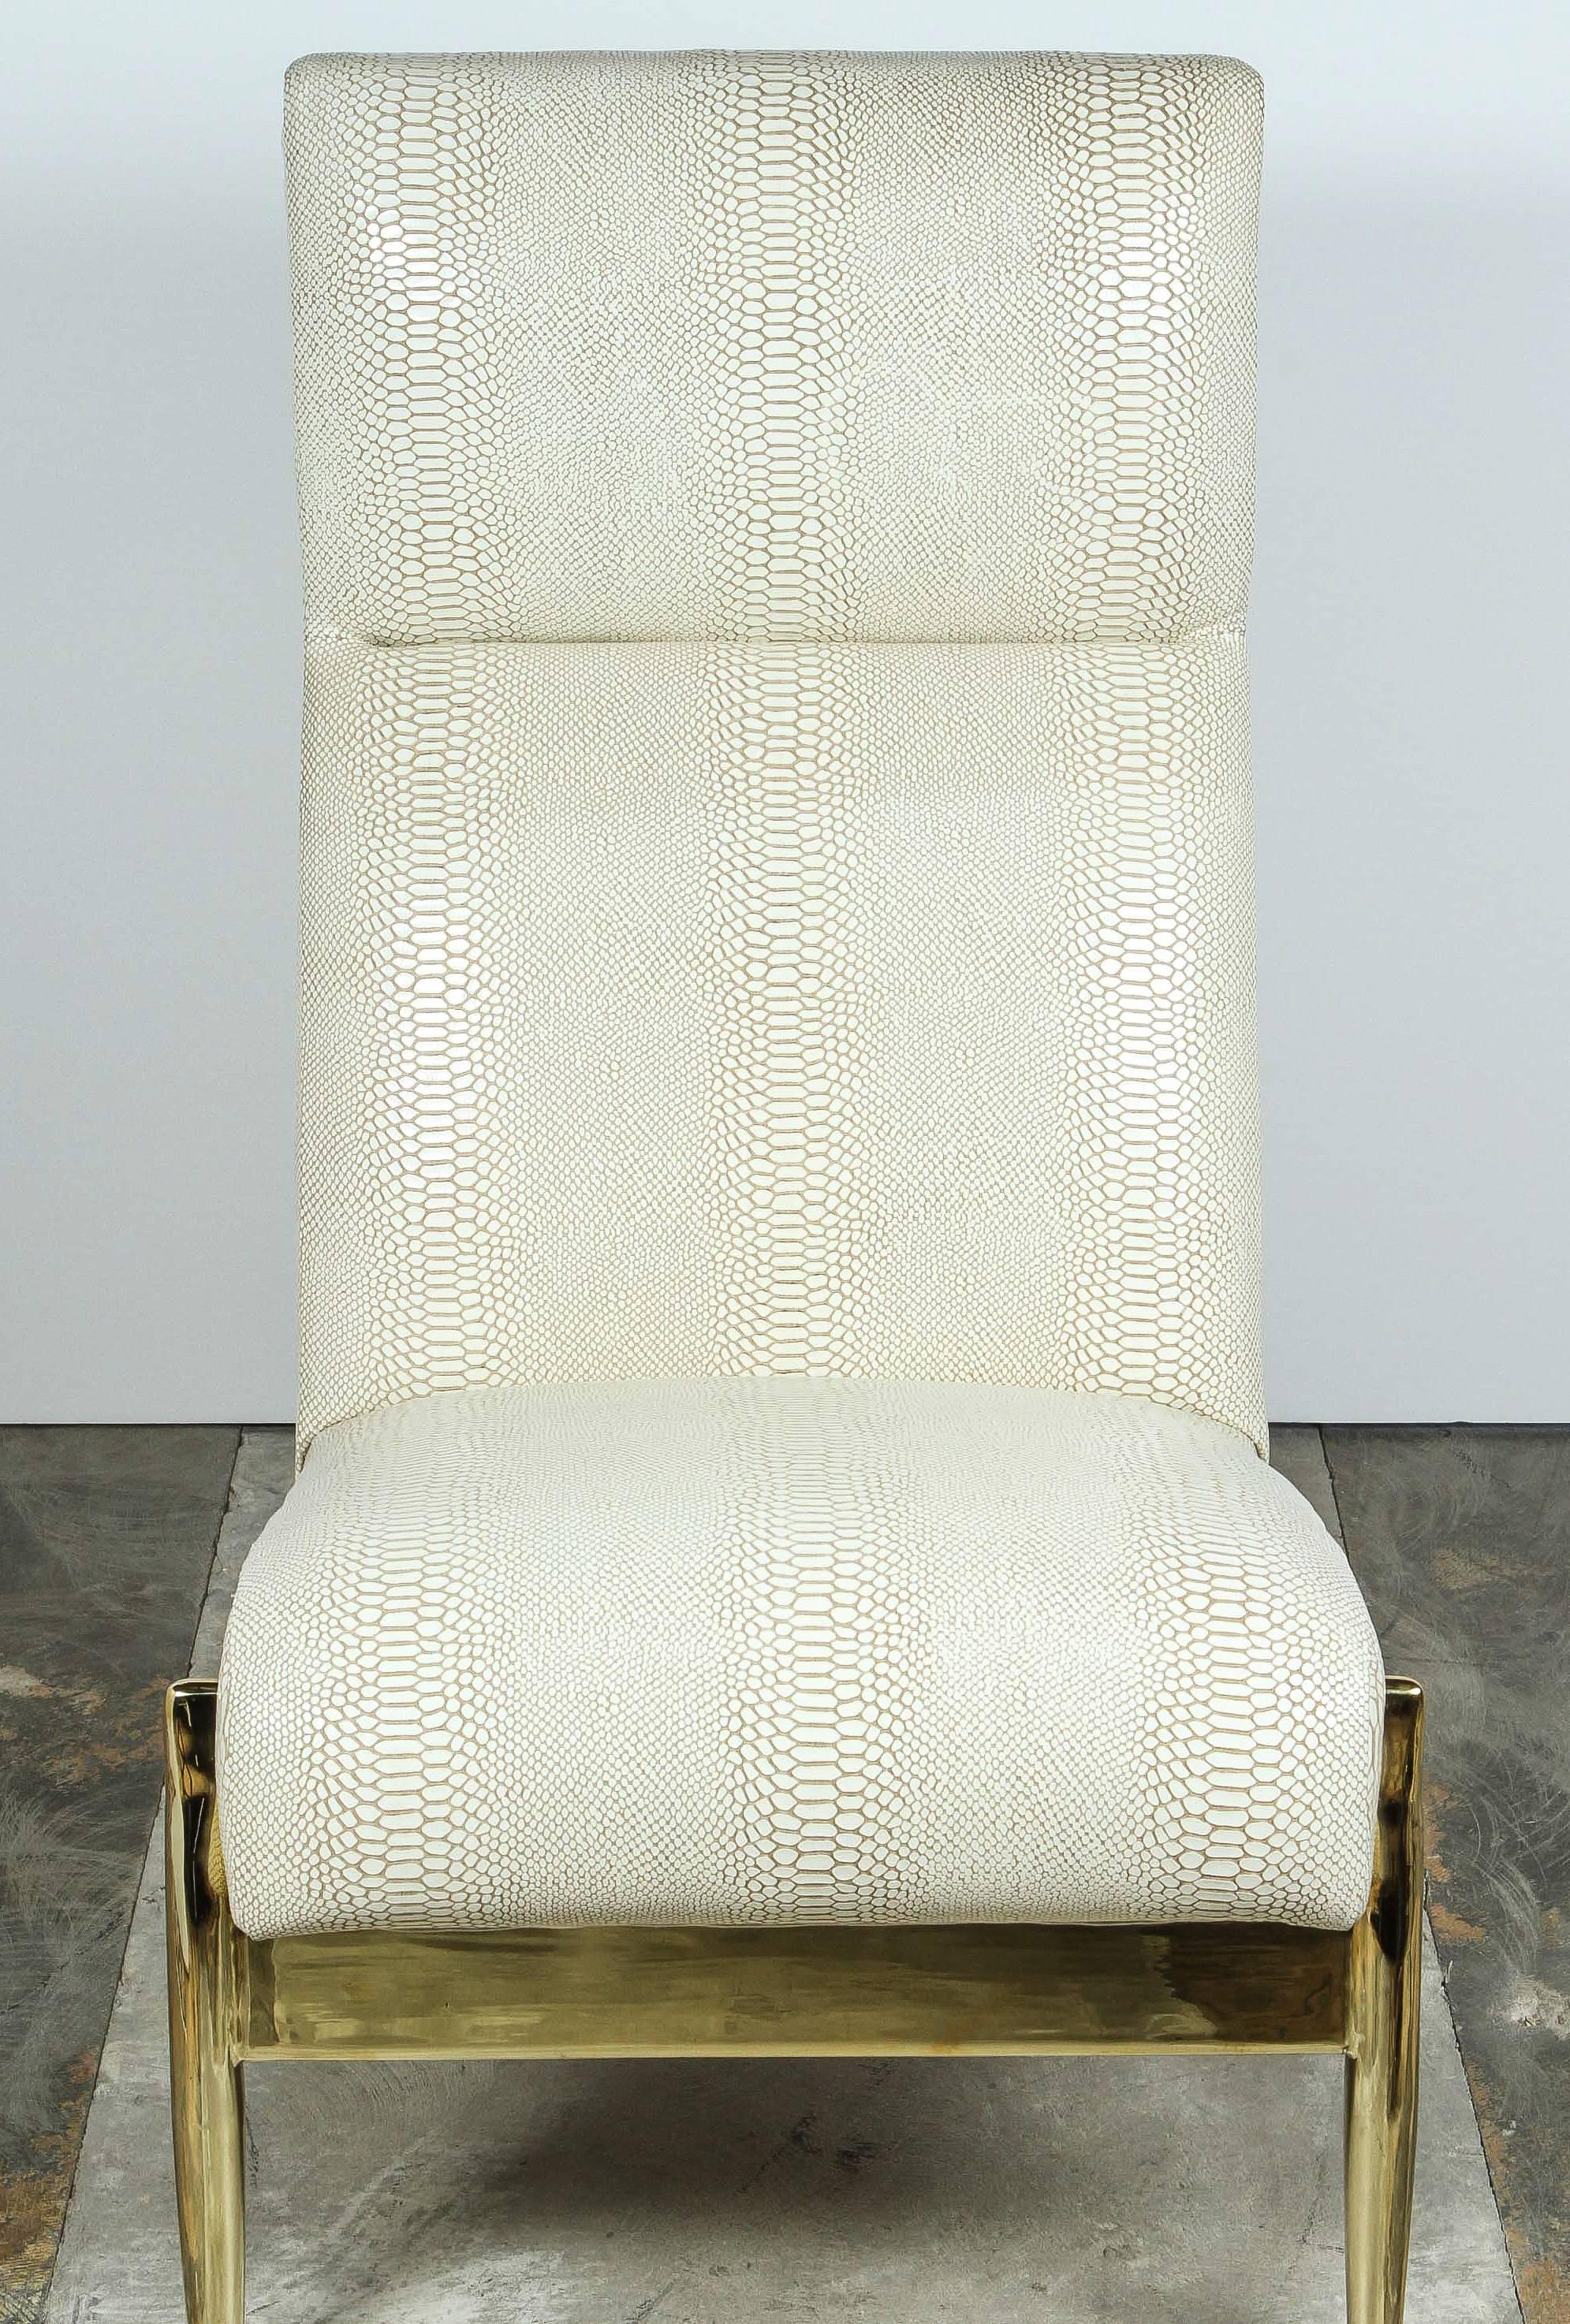 Contemporary Paul Marra Slipper Chair in Brass with Faux Python For Sale